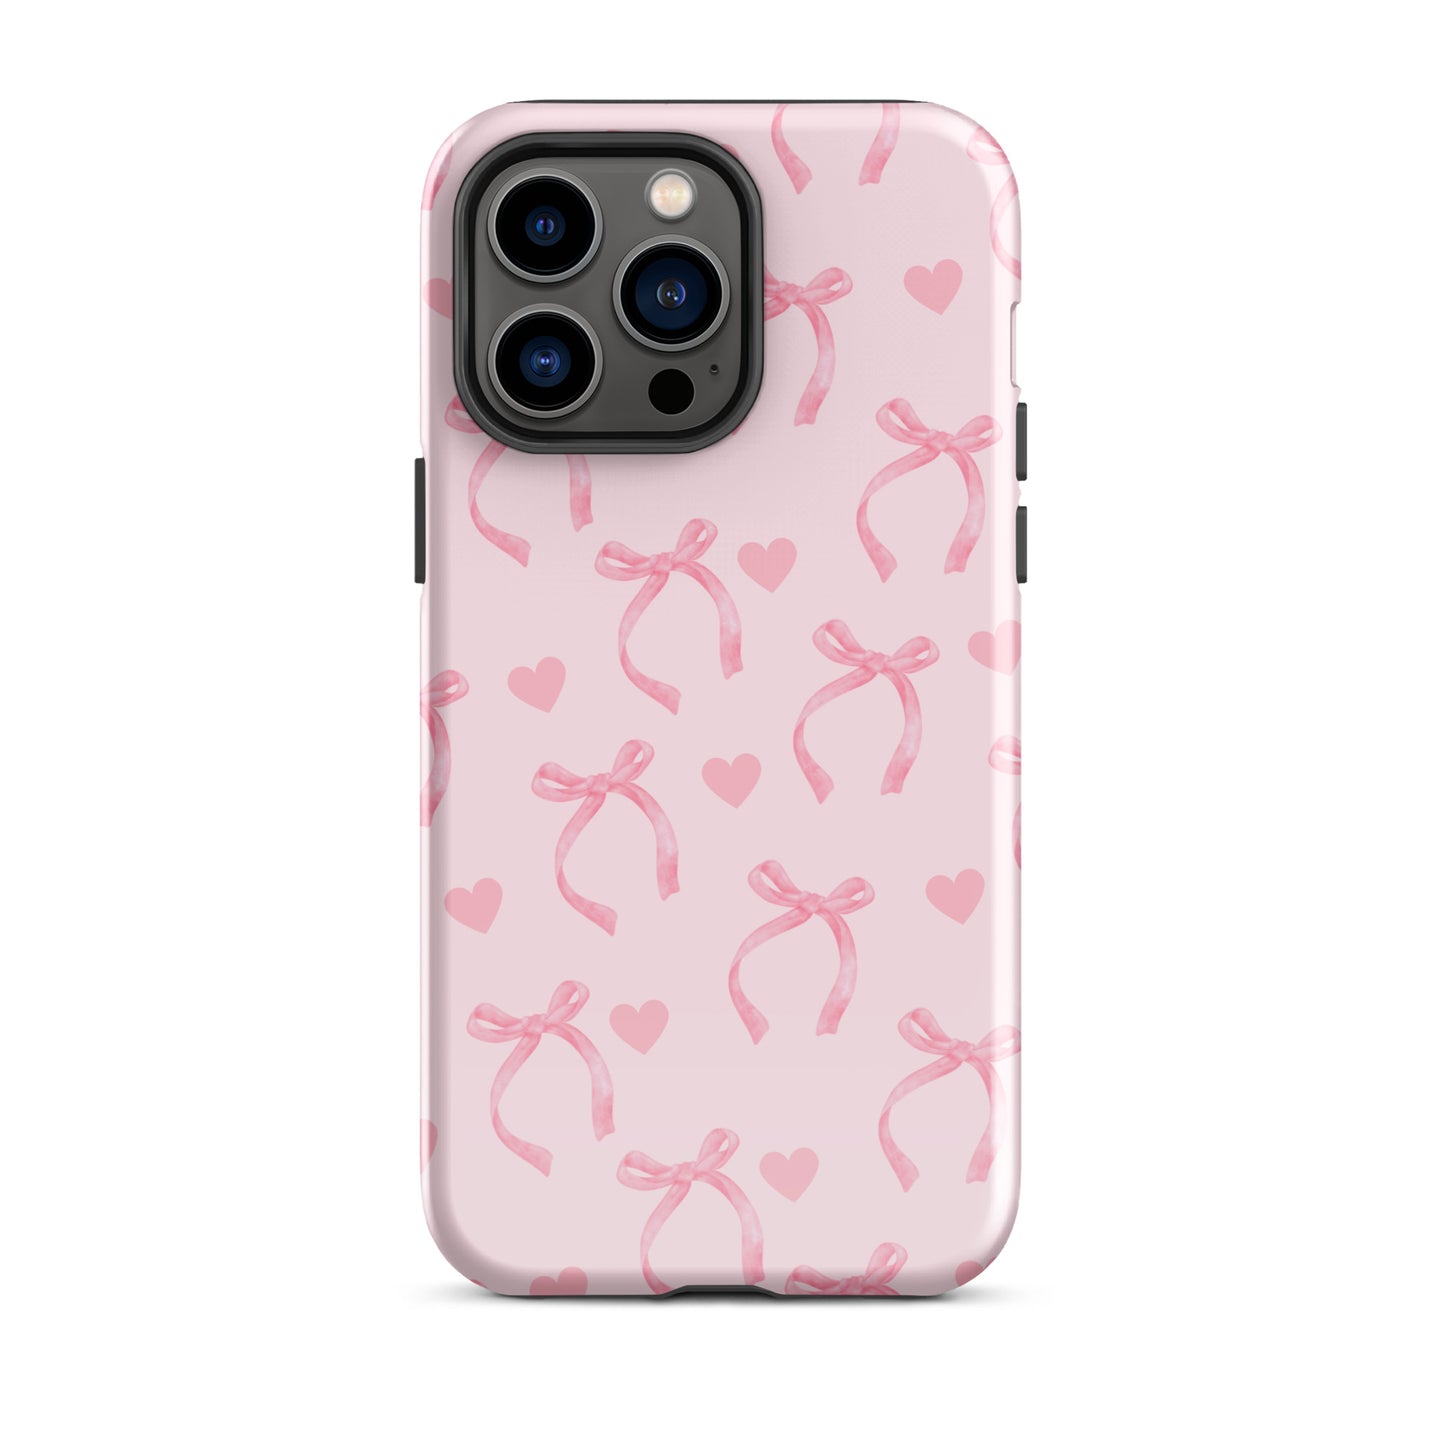 Bows & Hearts iPhone Case